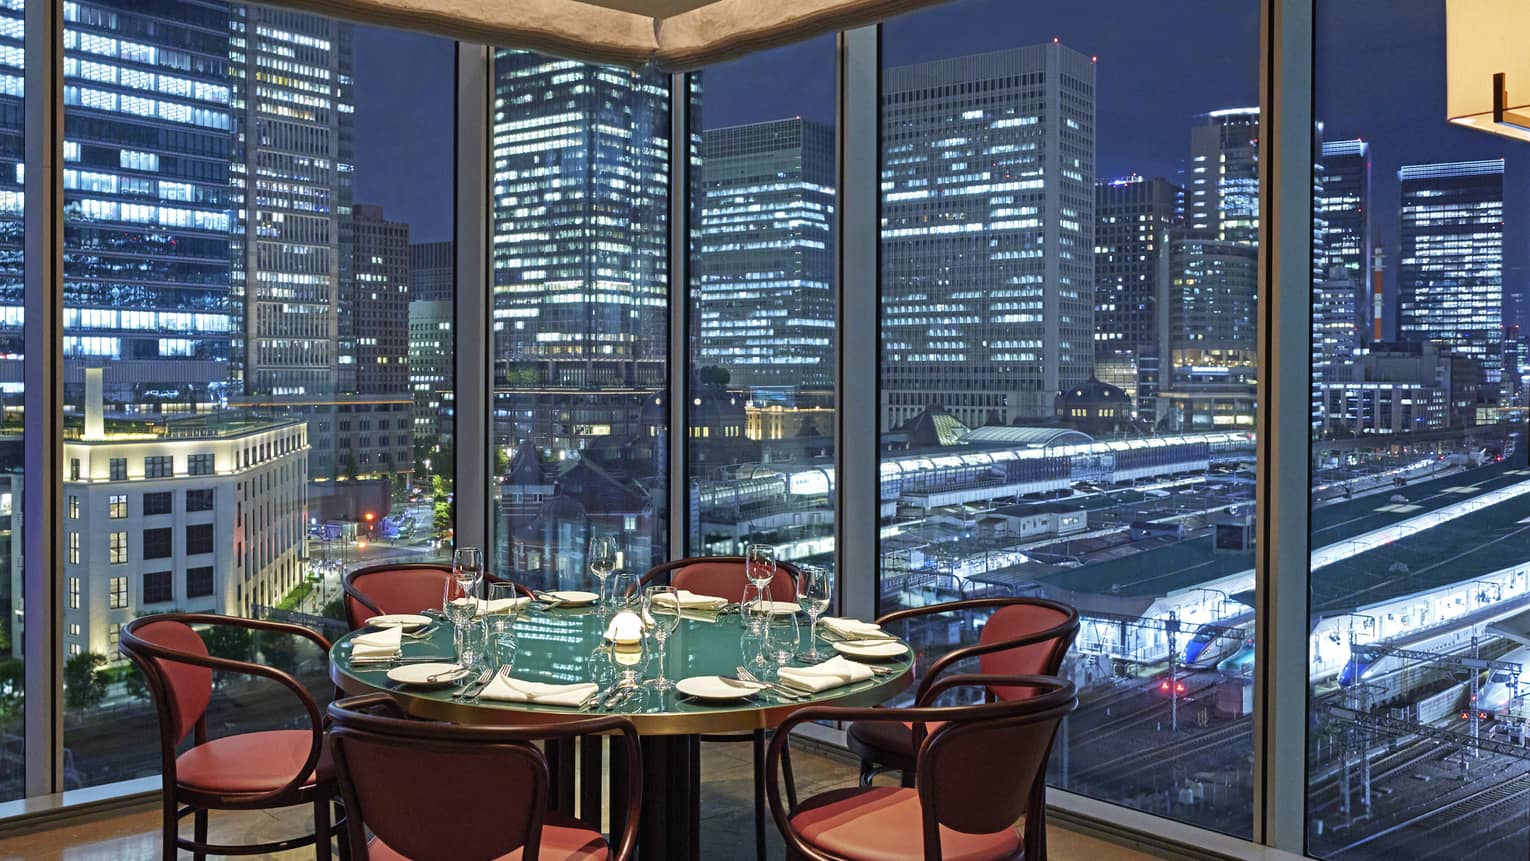 A round table and six chairs at Maison Marunouchi, floor-to-ceiling windows with views of downtown Tokyo at night